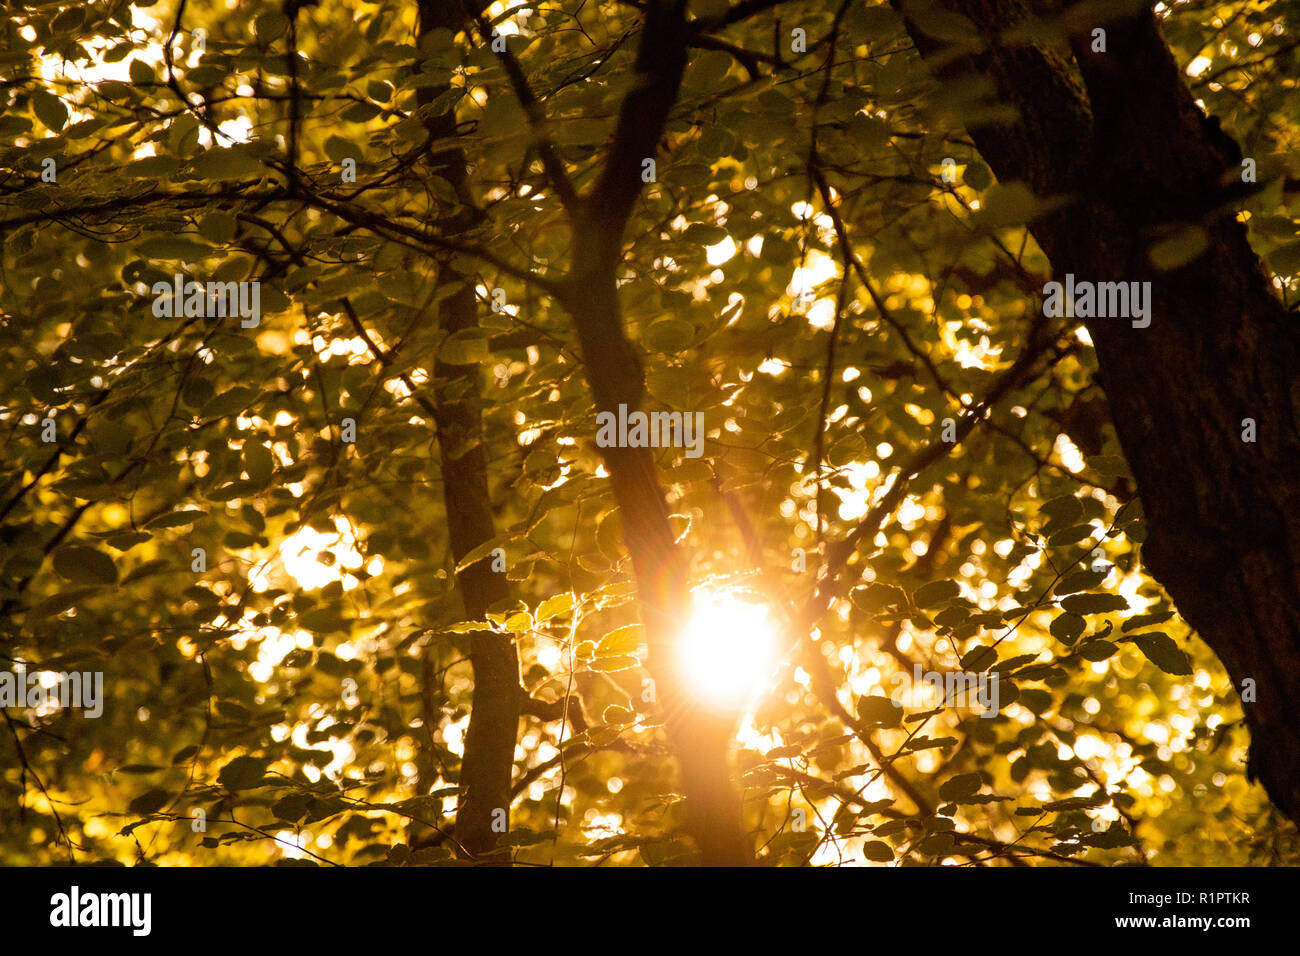 Trees in summertime, Leaves close up with lens flare Stock Photo